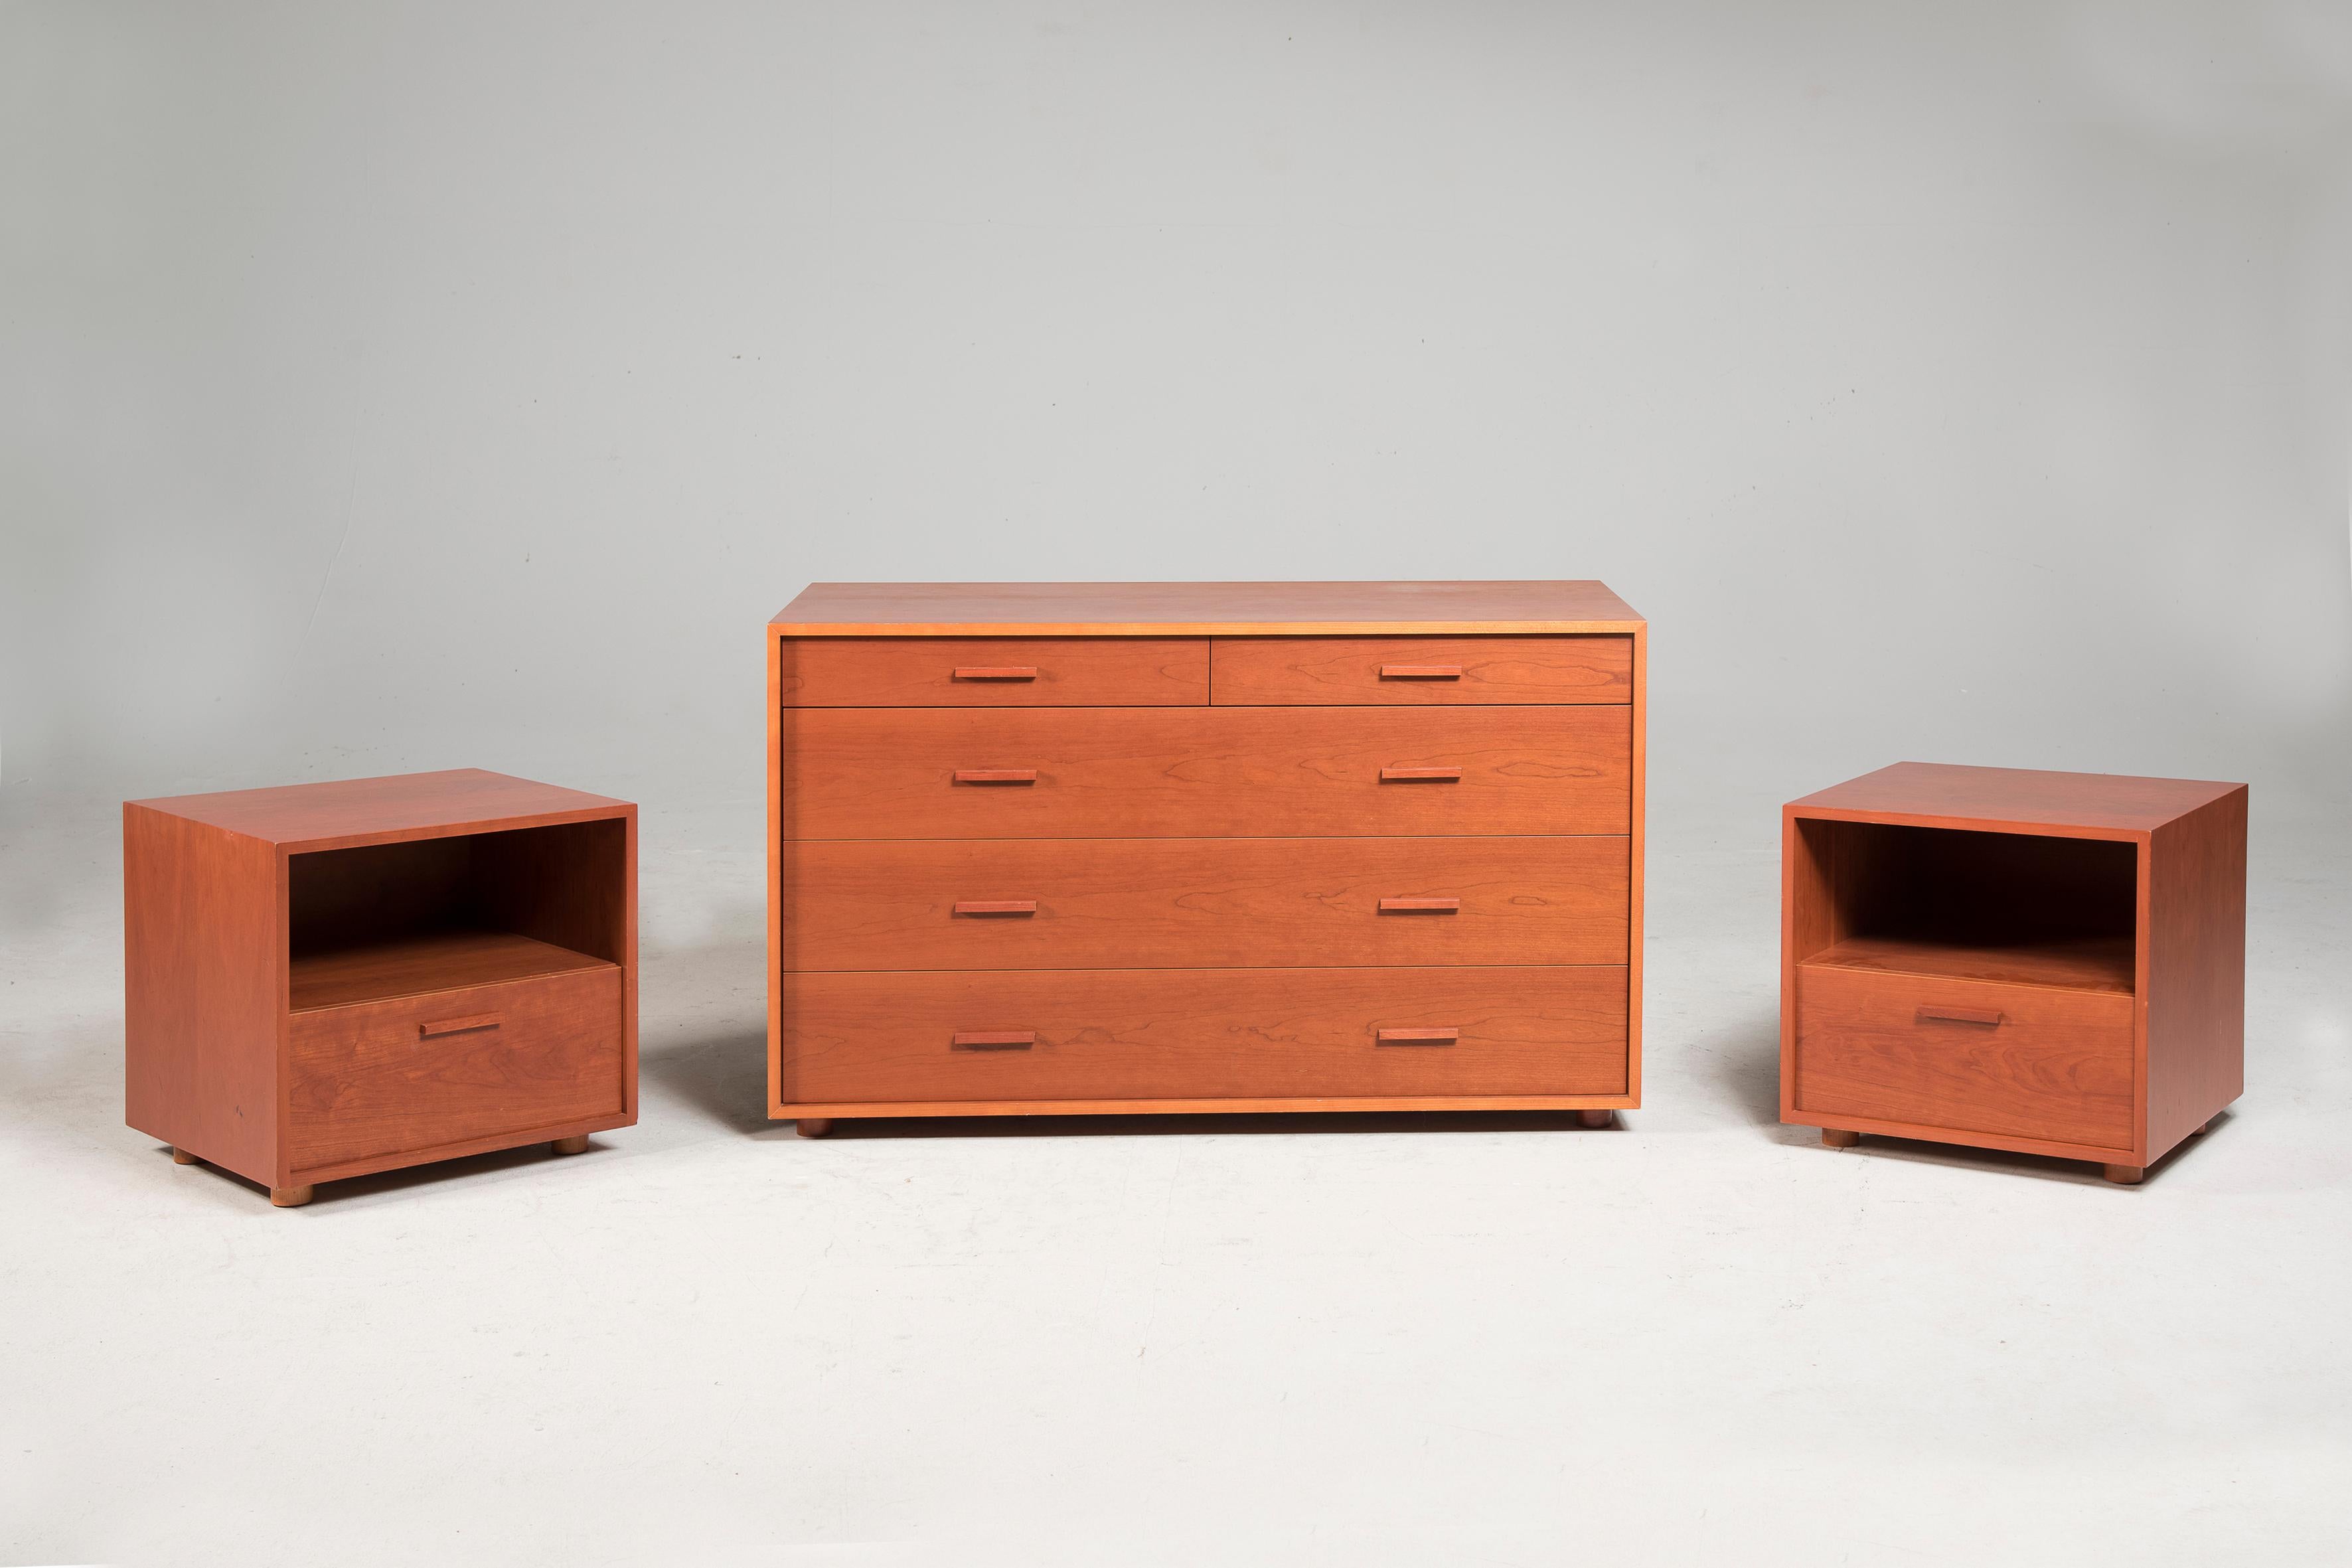 Vintage FLOU chest of drawers and pair of bedside tables, Mono series in cherry wood.
Dresser dimensions: cm 120 x cm 57 height cm 75
Bedside table measures: 50 cm x 47 cm, height 50 cm.